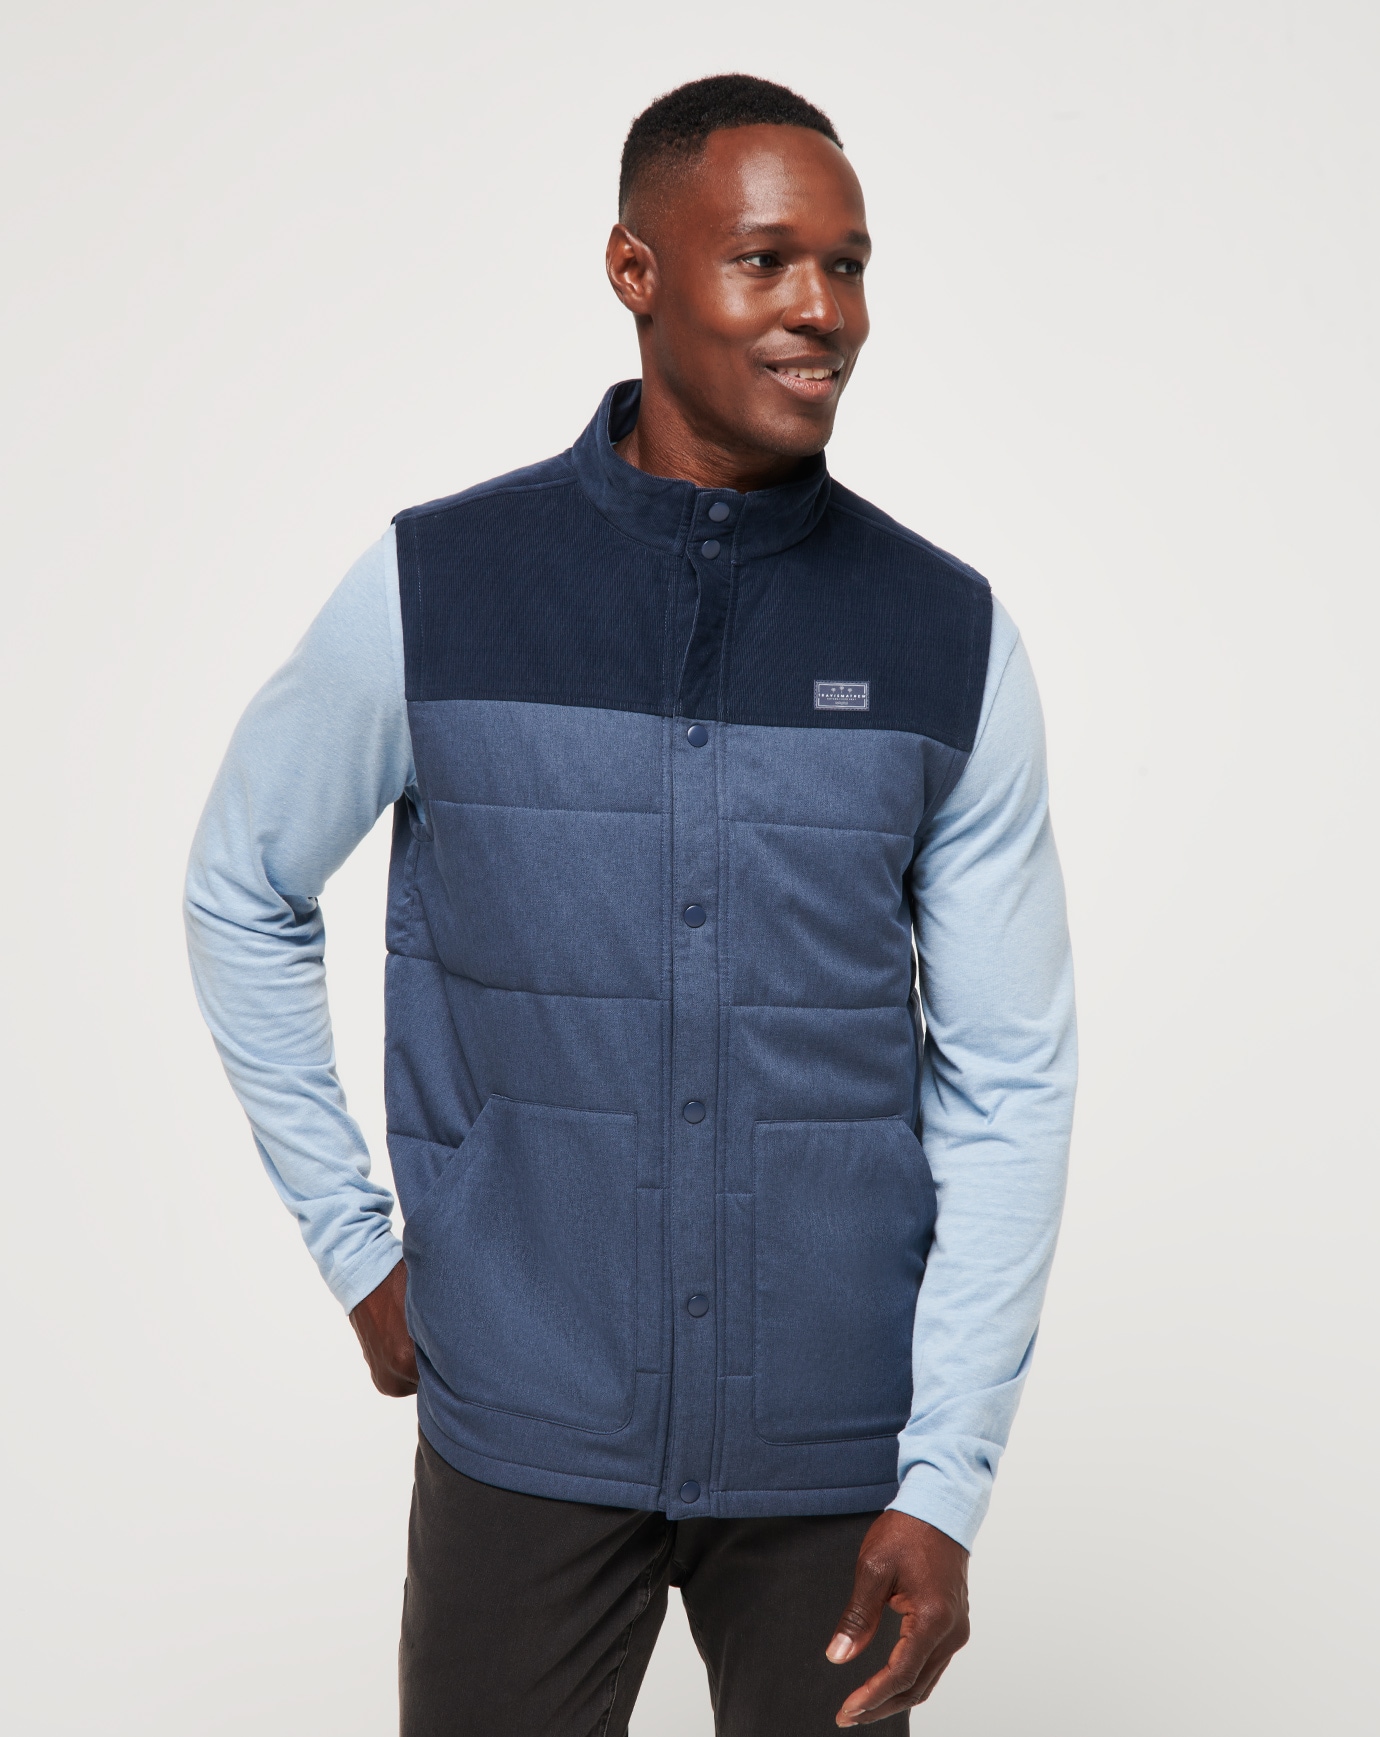 Related Product - BUSINESS CLASS VEST